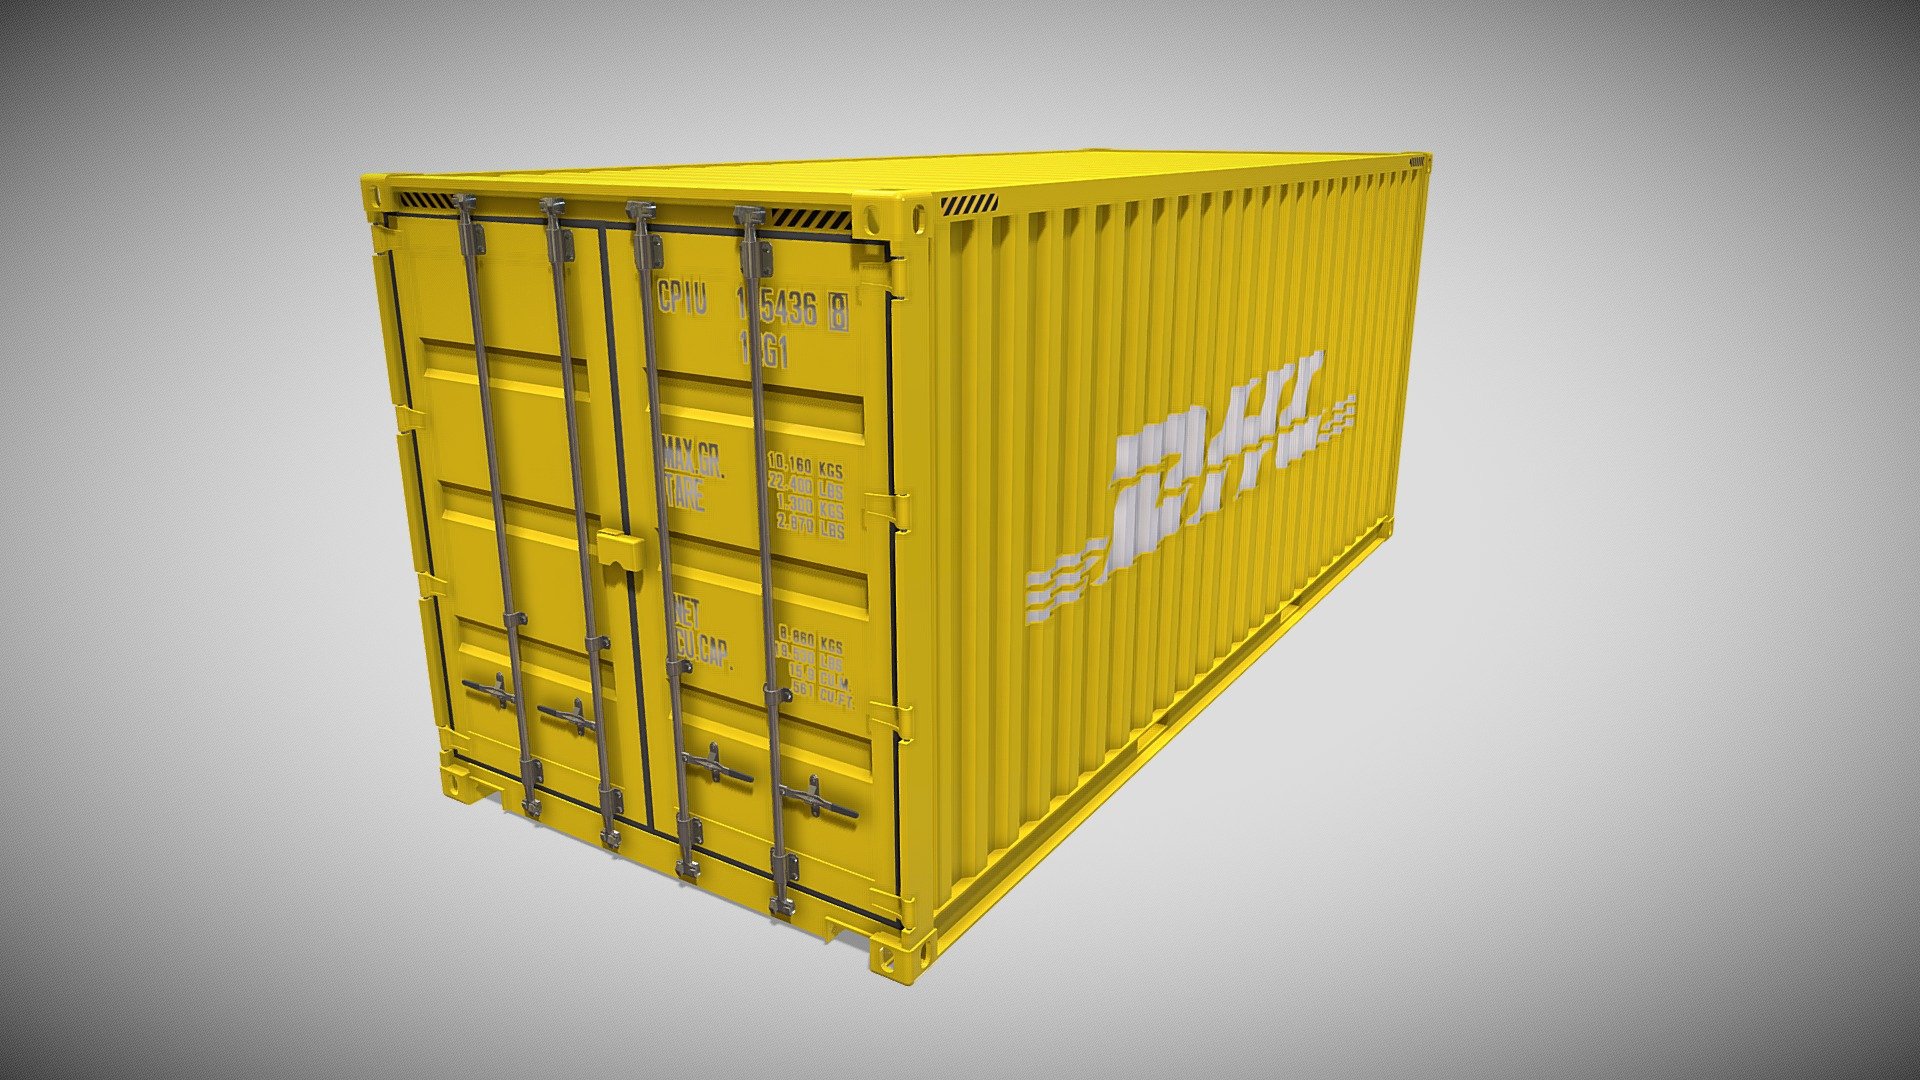 20ft Shipping Container 3d model rendered with Cycles in Blender, as per seen on attached images. 

File formats:
-.blend, rendered with cycles, as seen in the images;
-.obj, with materials applied;
-.dae, with materials applied;
-.fbx, with materials applied;
-.stl;

-.blend, with doors open, rendered with cycles, as seen in the images;
-.obj, with doors open, with materials applied;
-.dae, with doors open, with materials applied;
-.fbx, with doors open, with materials applied;
-.stl;

Files come named appropriately and split by file format.

3D Software:
The 3D model was originally created in Blender 2.8 and rendered with Cycles.

Materials and textures:
The models have materials applied in all formats, and are ready to import and render.
The model comes with two png image textures 3d model